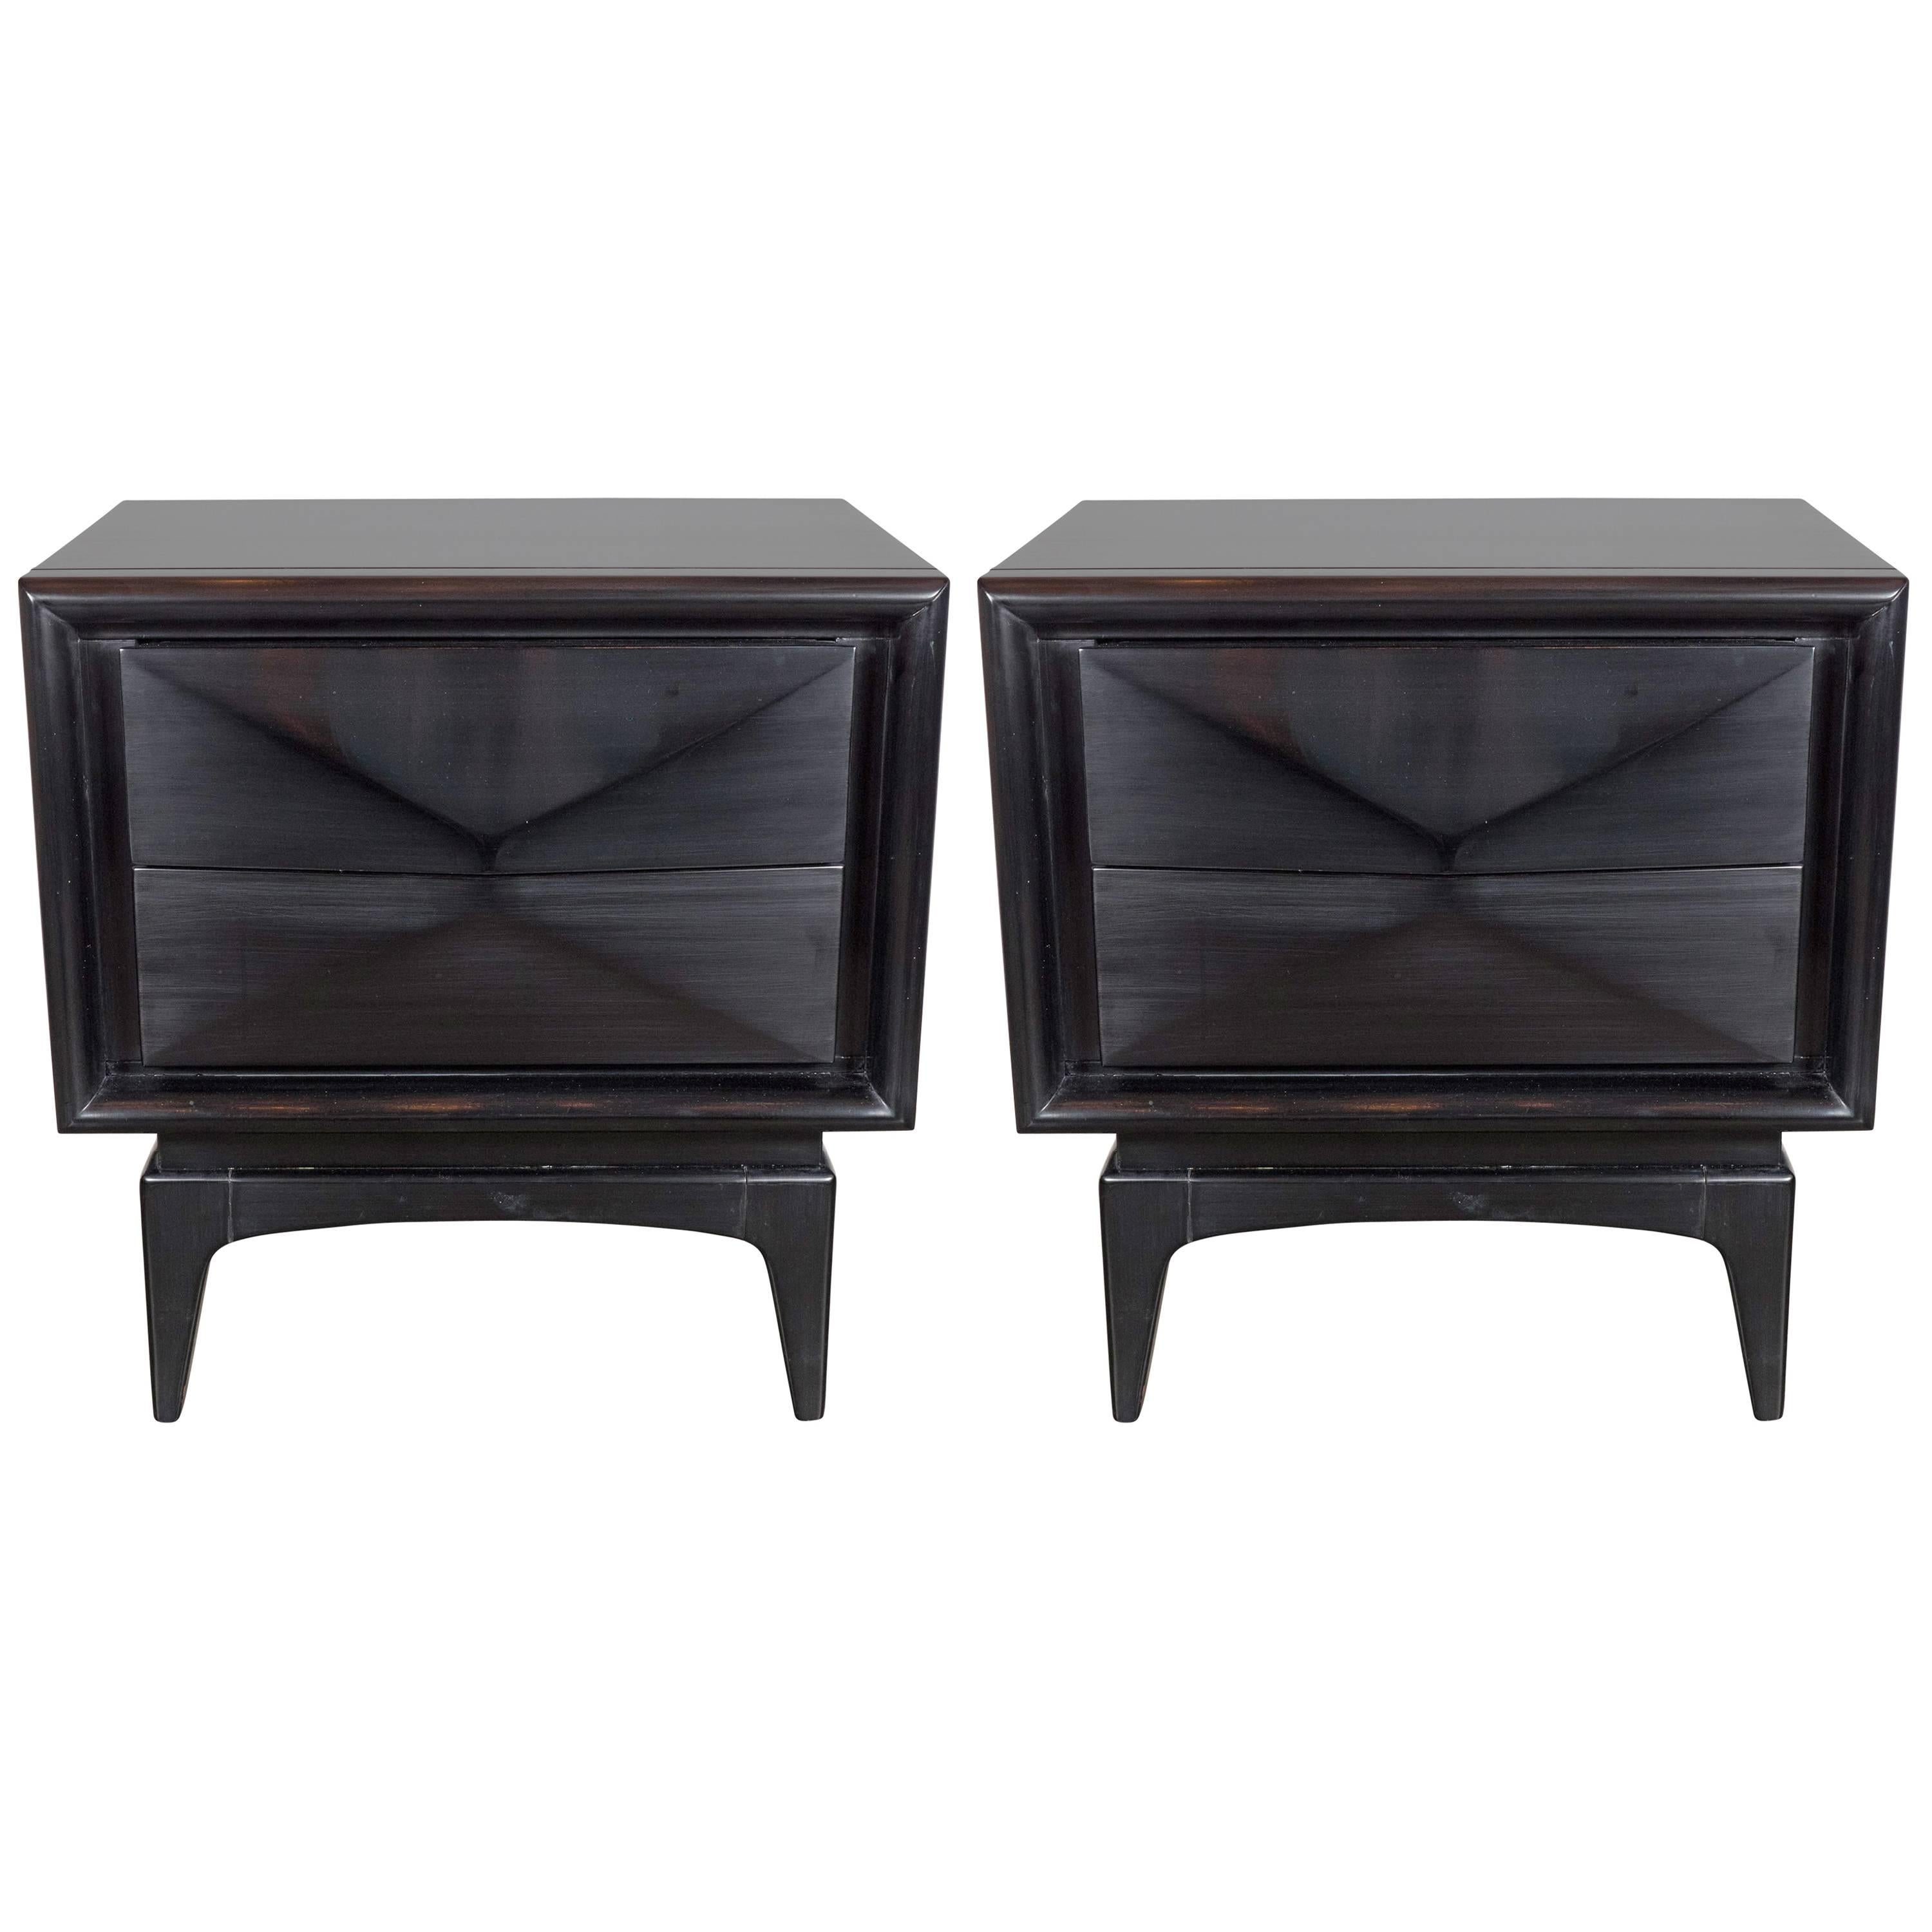 Pair of Mid-Century Modernist Cubist Nightstands with Angular Fronted Drawers